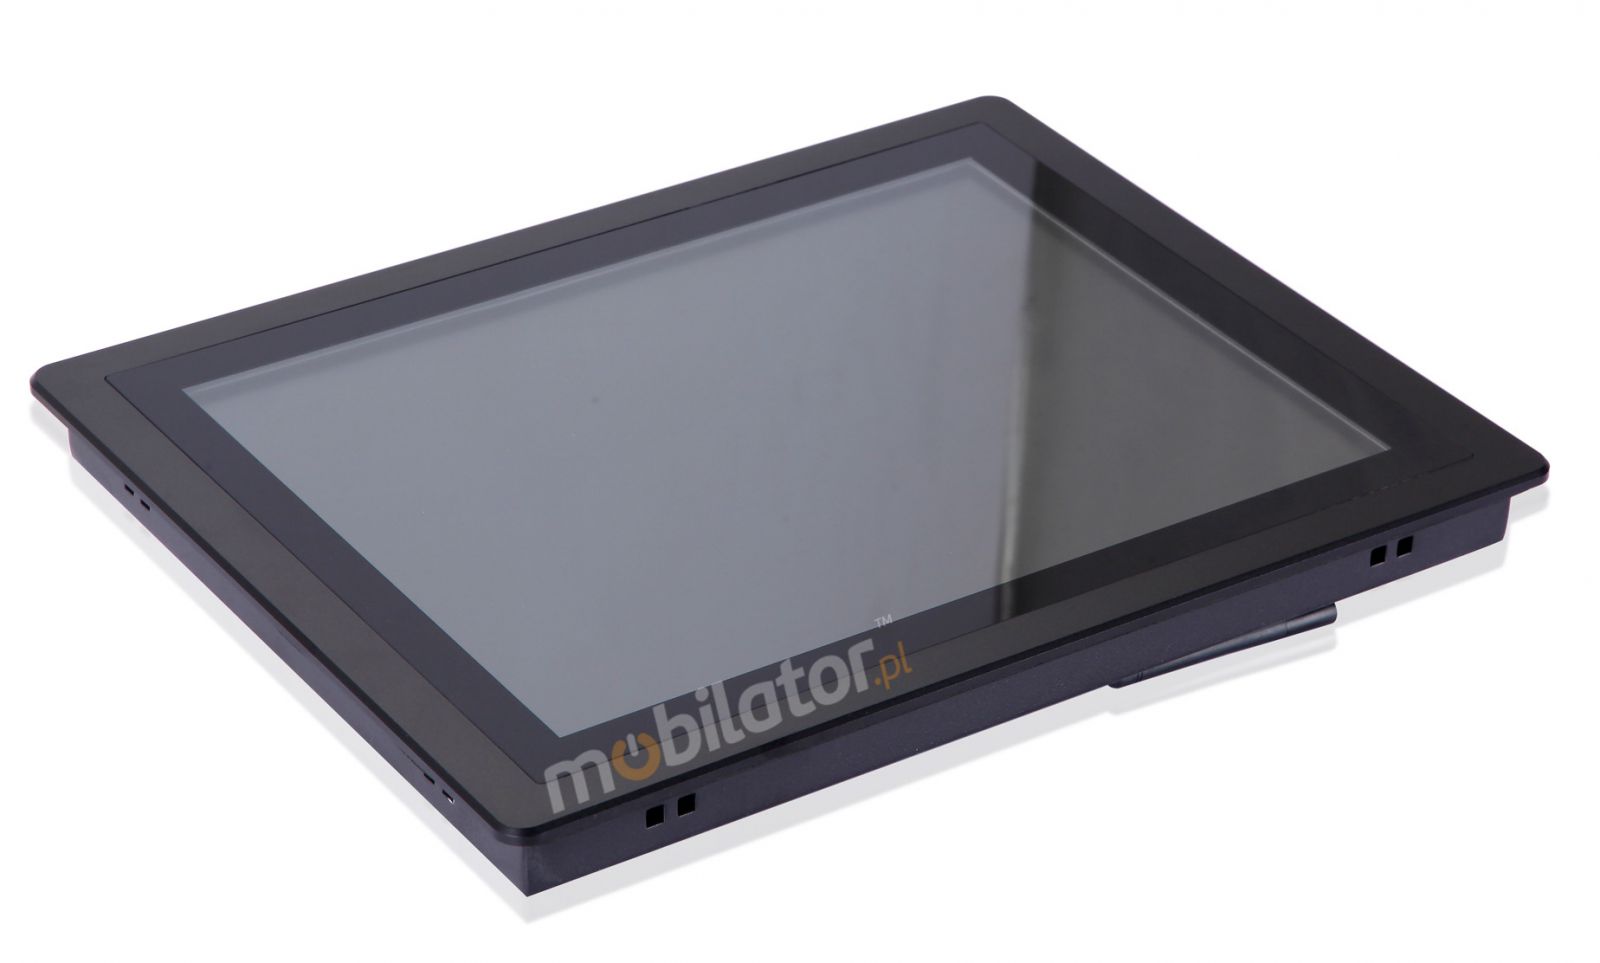 Mobilator CTPC150RD3 PCPanel LED panel, 10 points touch screen, built-in WIFI, 12V DC input